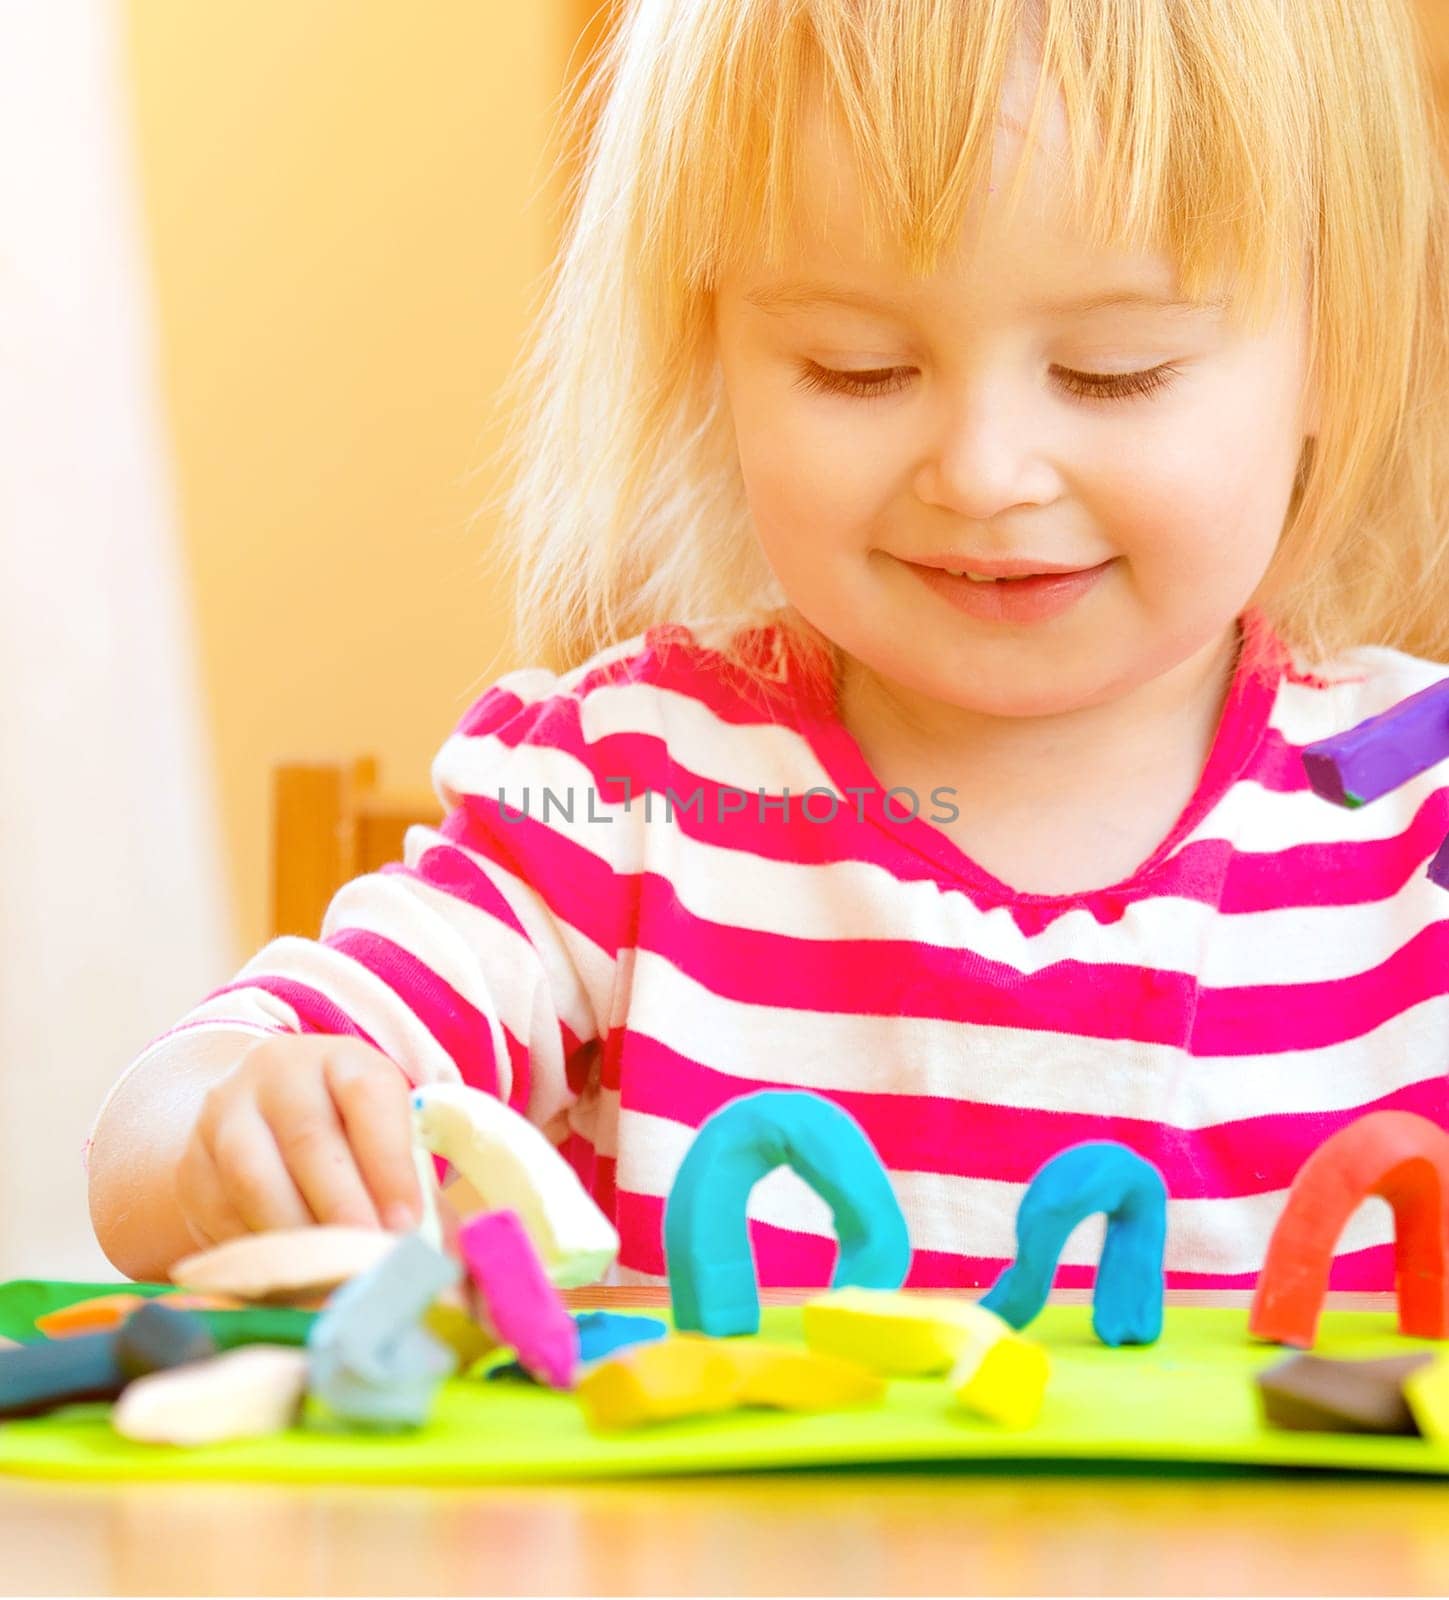 Cute girl playing with plasticine at home